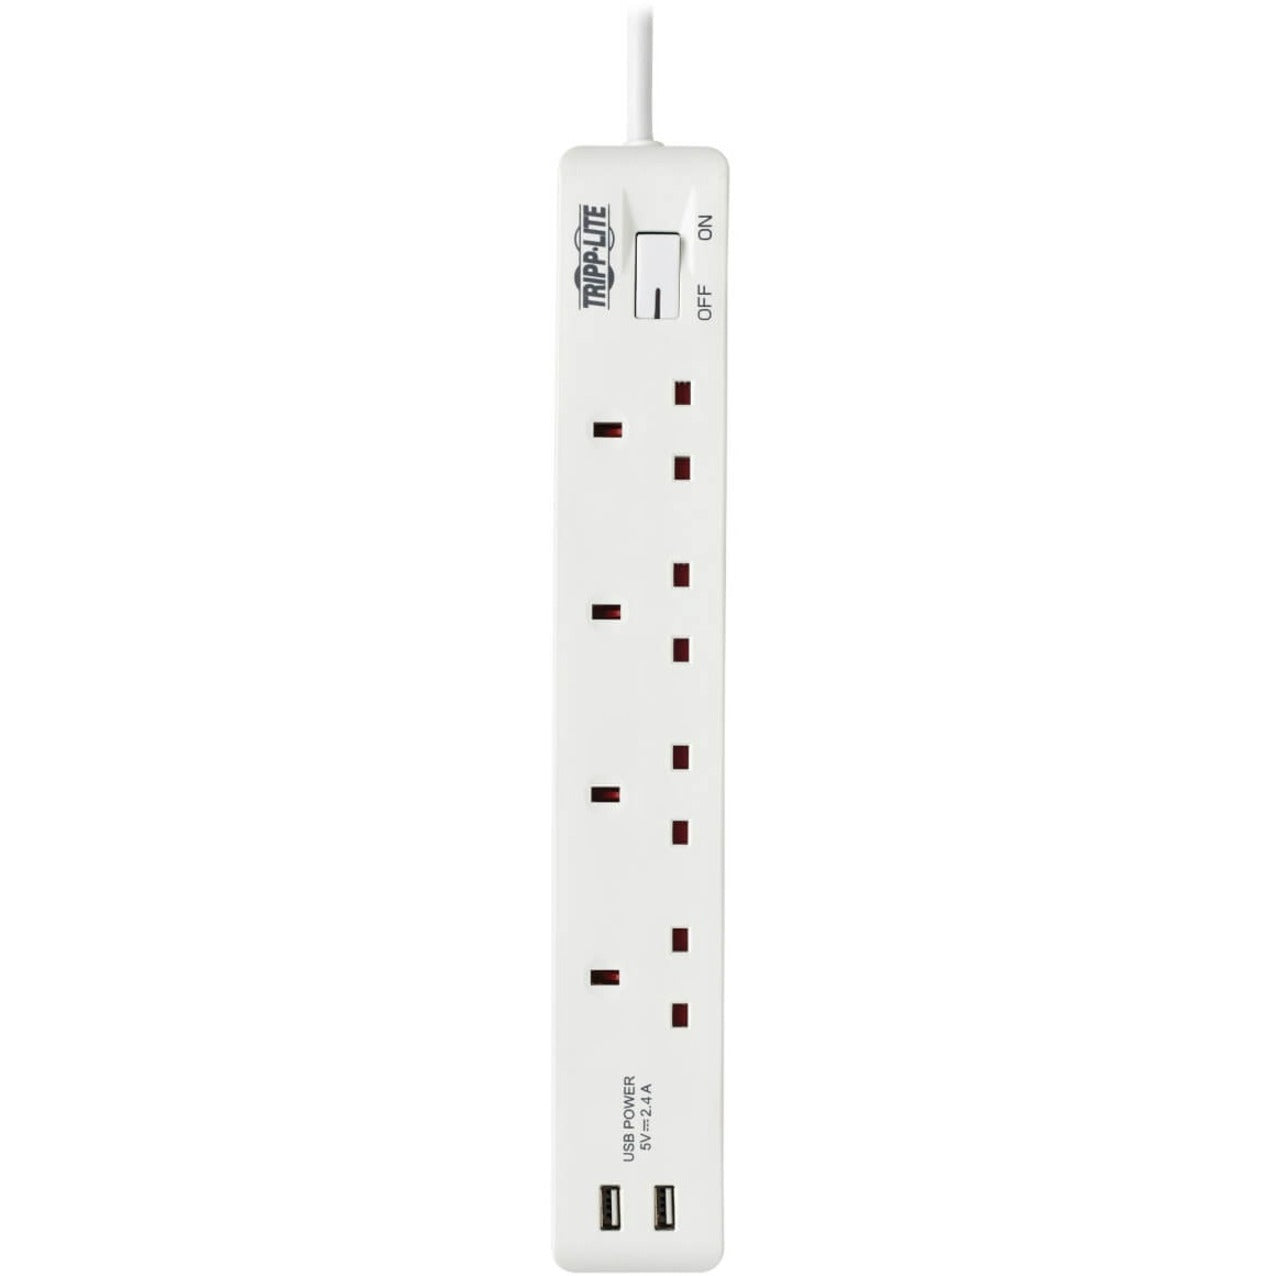 Tripp Lite 4-Outlet Power Strip with USB-A Charging BS1363A Outlets 220-250V 13A 1.8 m Cord BS1363A Plug White